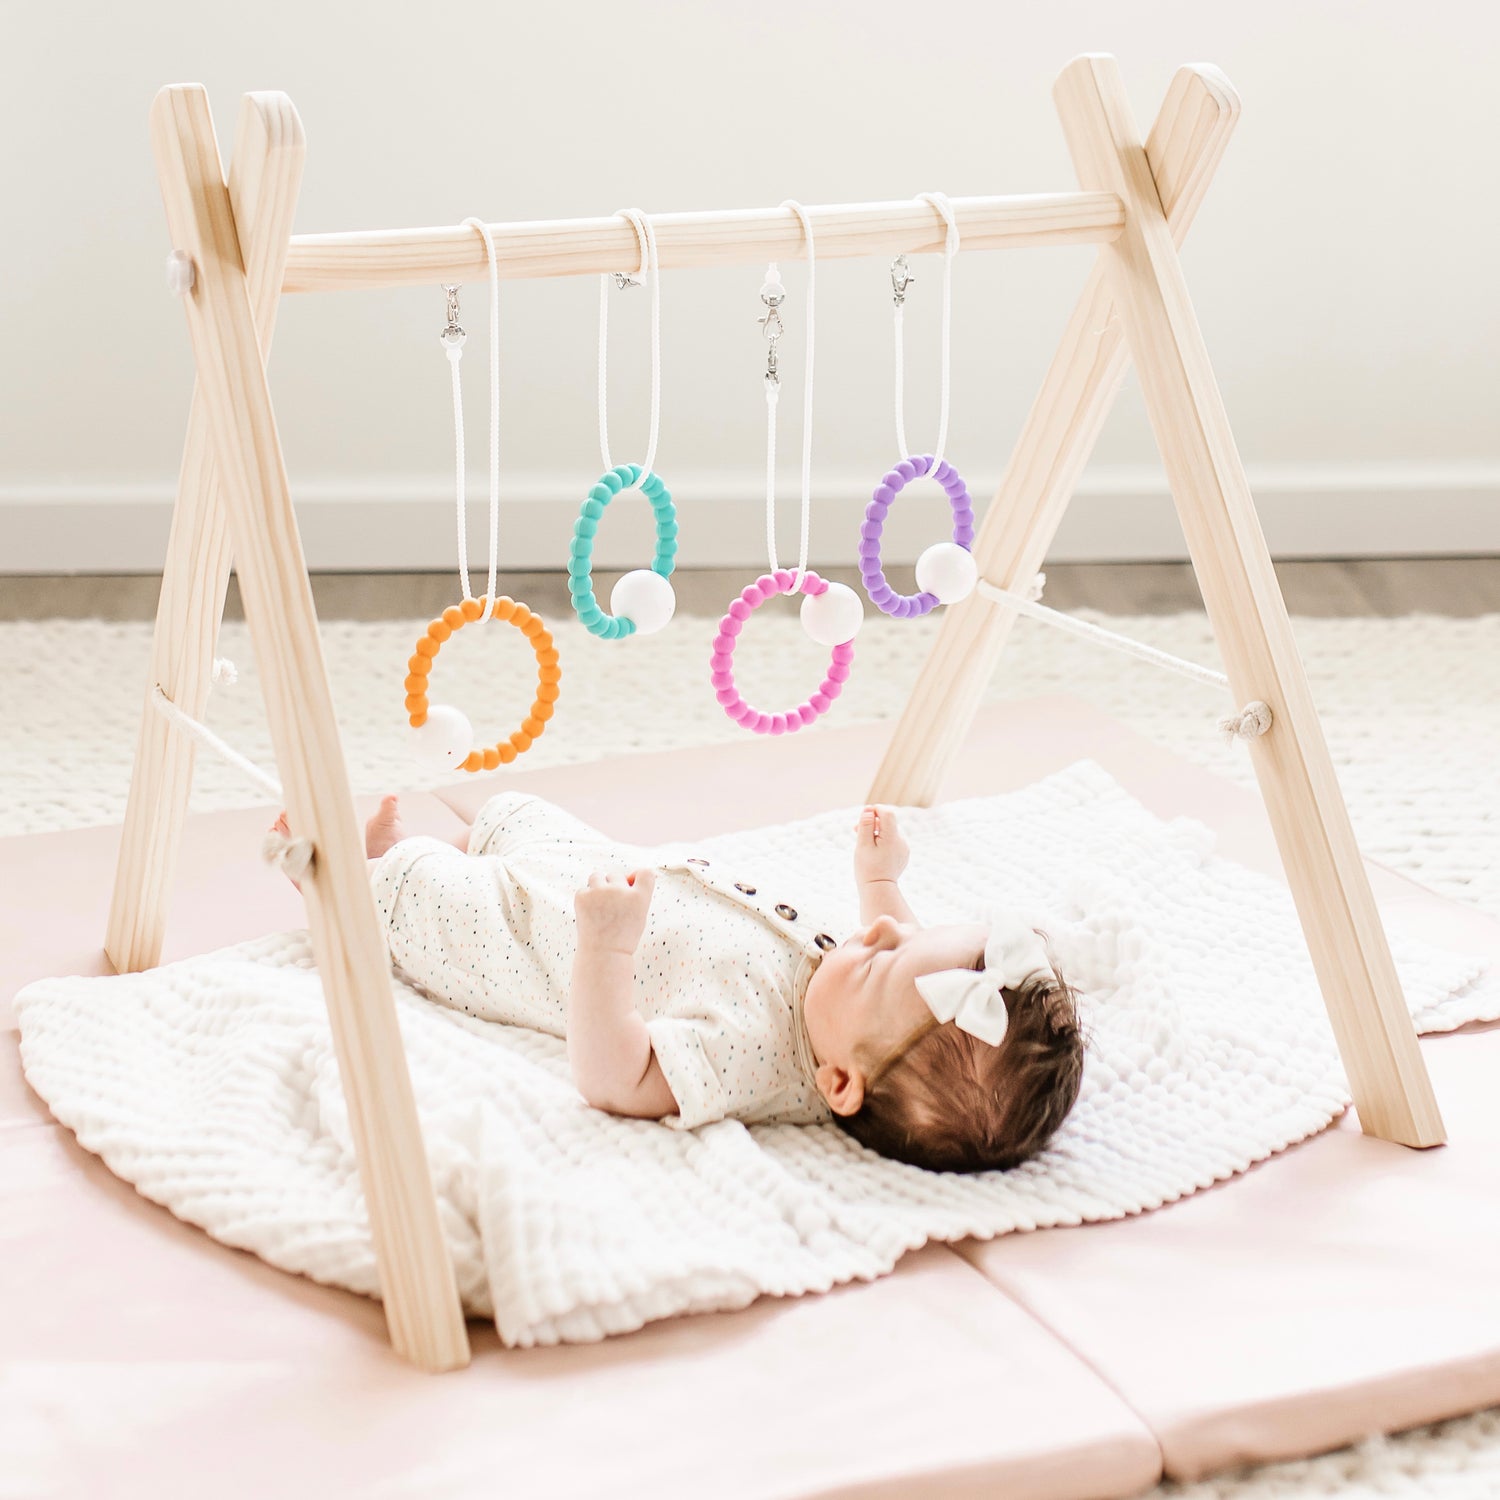 Baby laying underneath a play gym with Cutie Clasps hanging down attached to Cutie Teether Rattles.